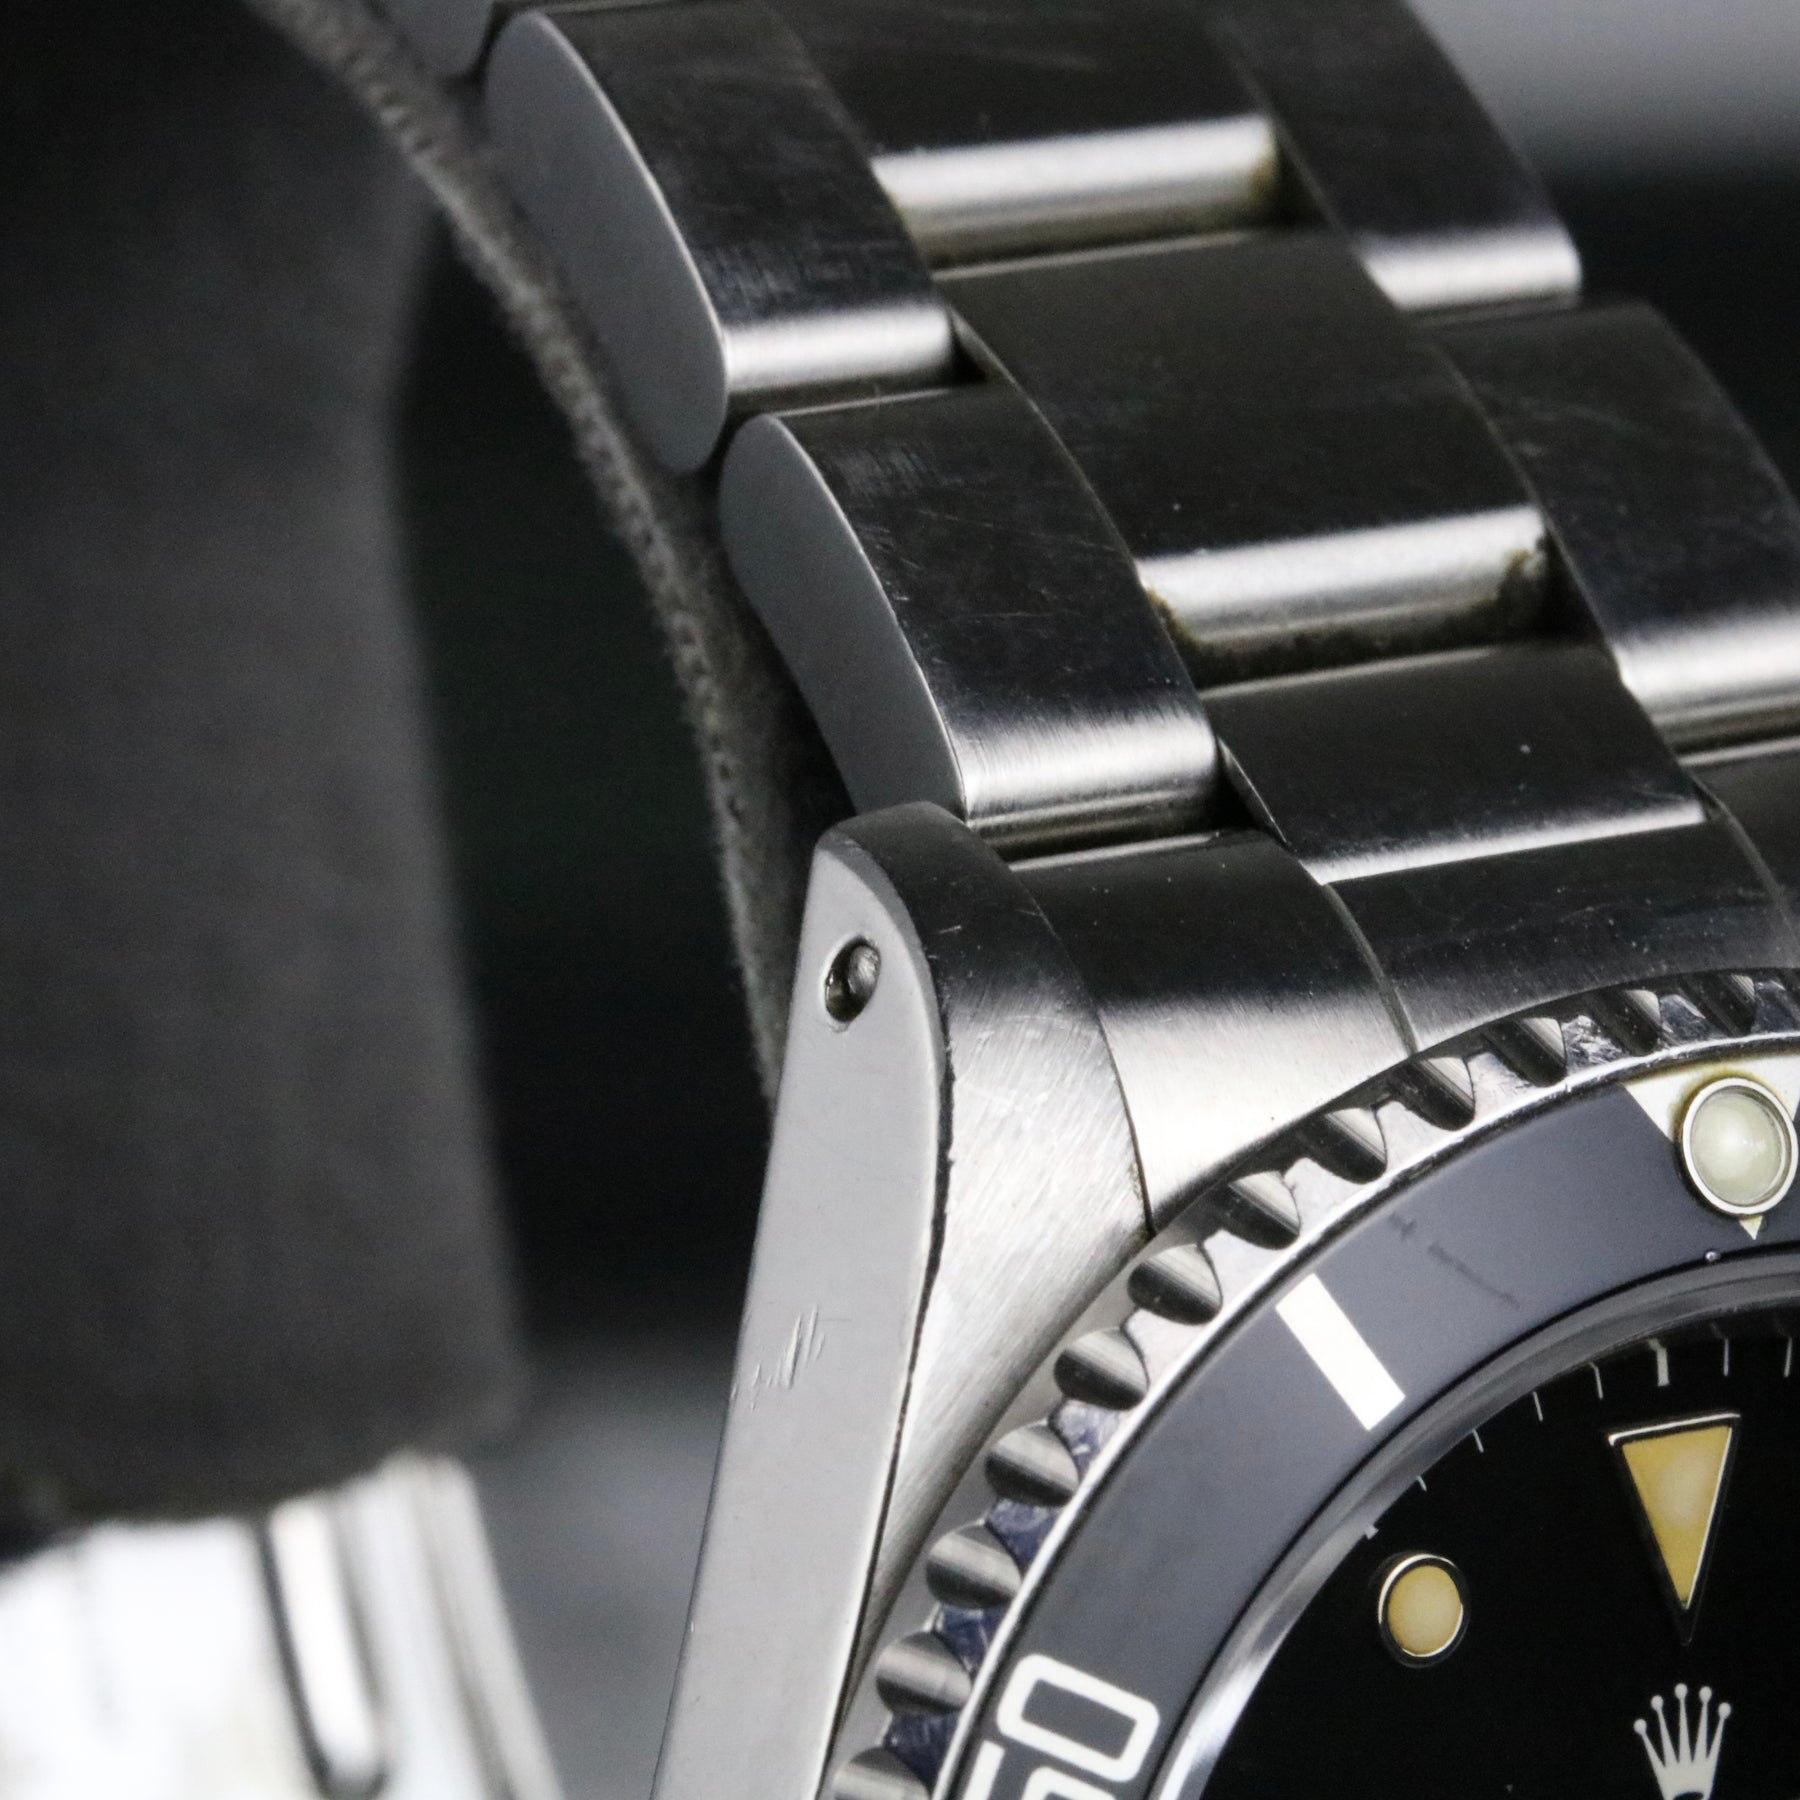 1989 Rolex 16610 Submariner with Holes Case Nice Patina